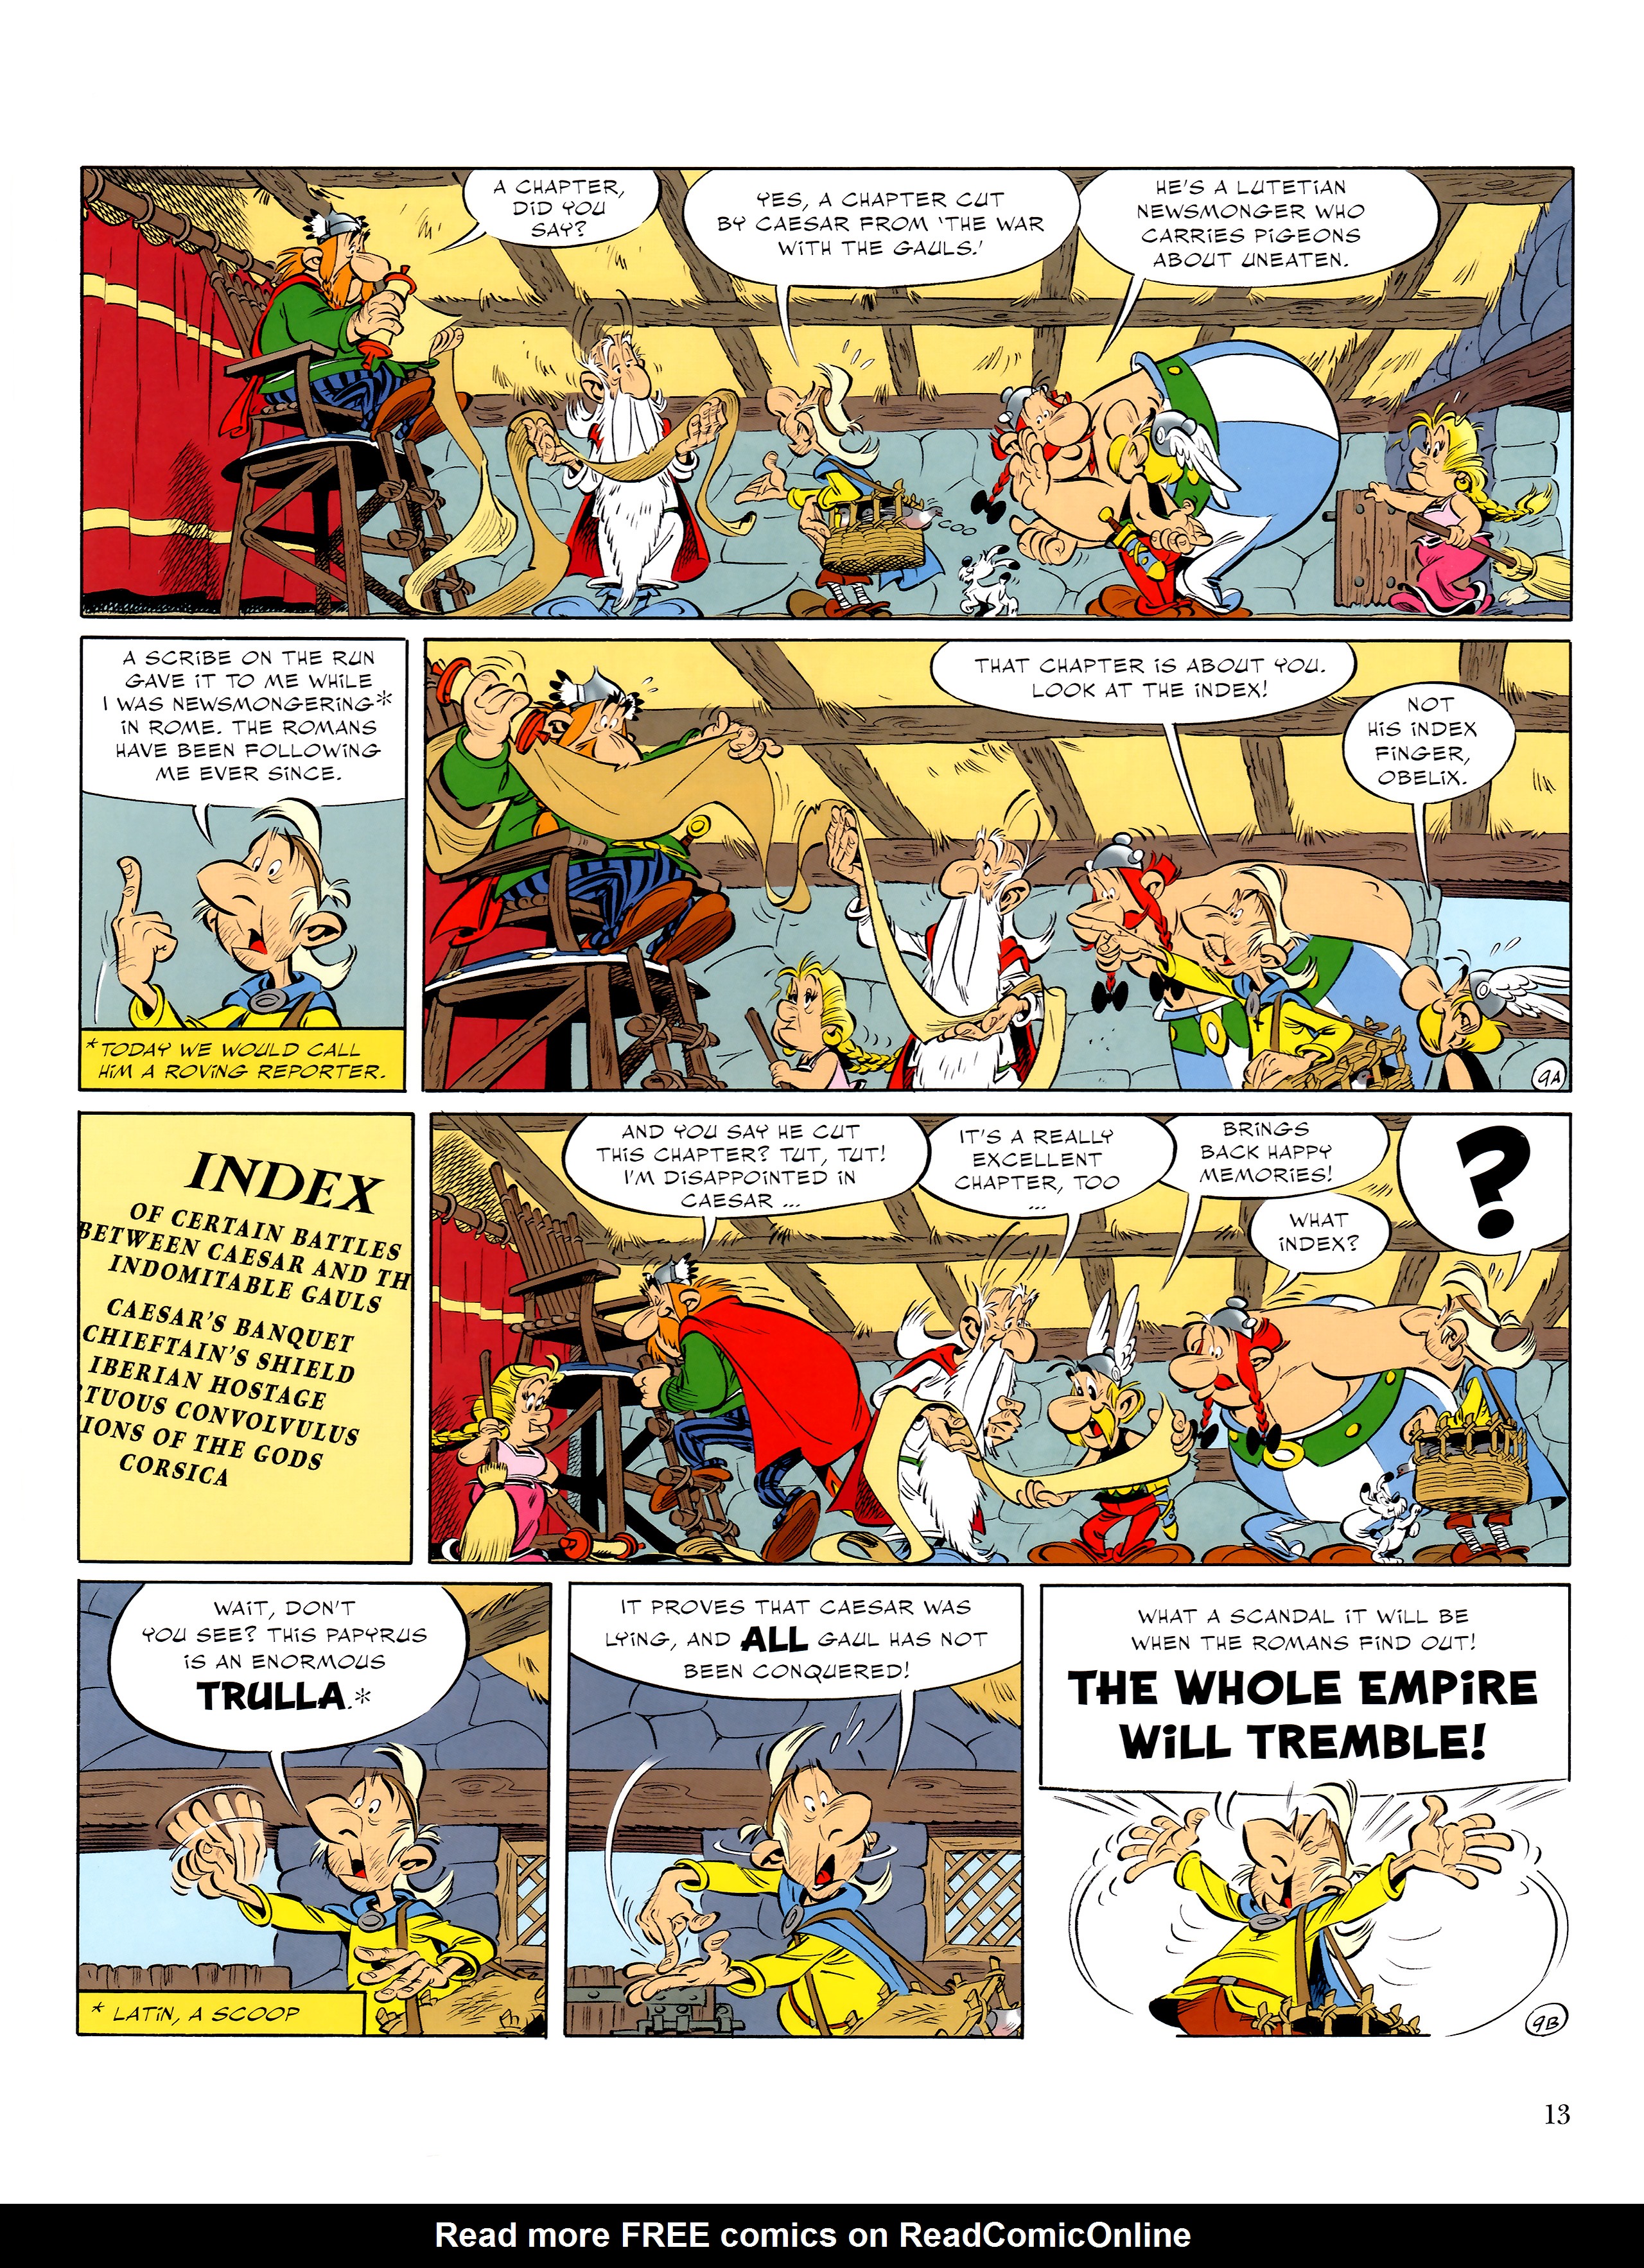 Read online Asterix comic -  Issue #36 - 14